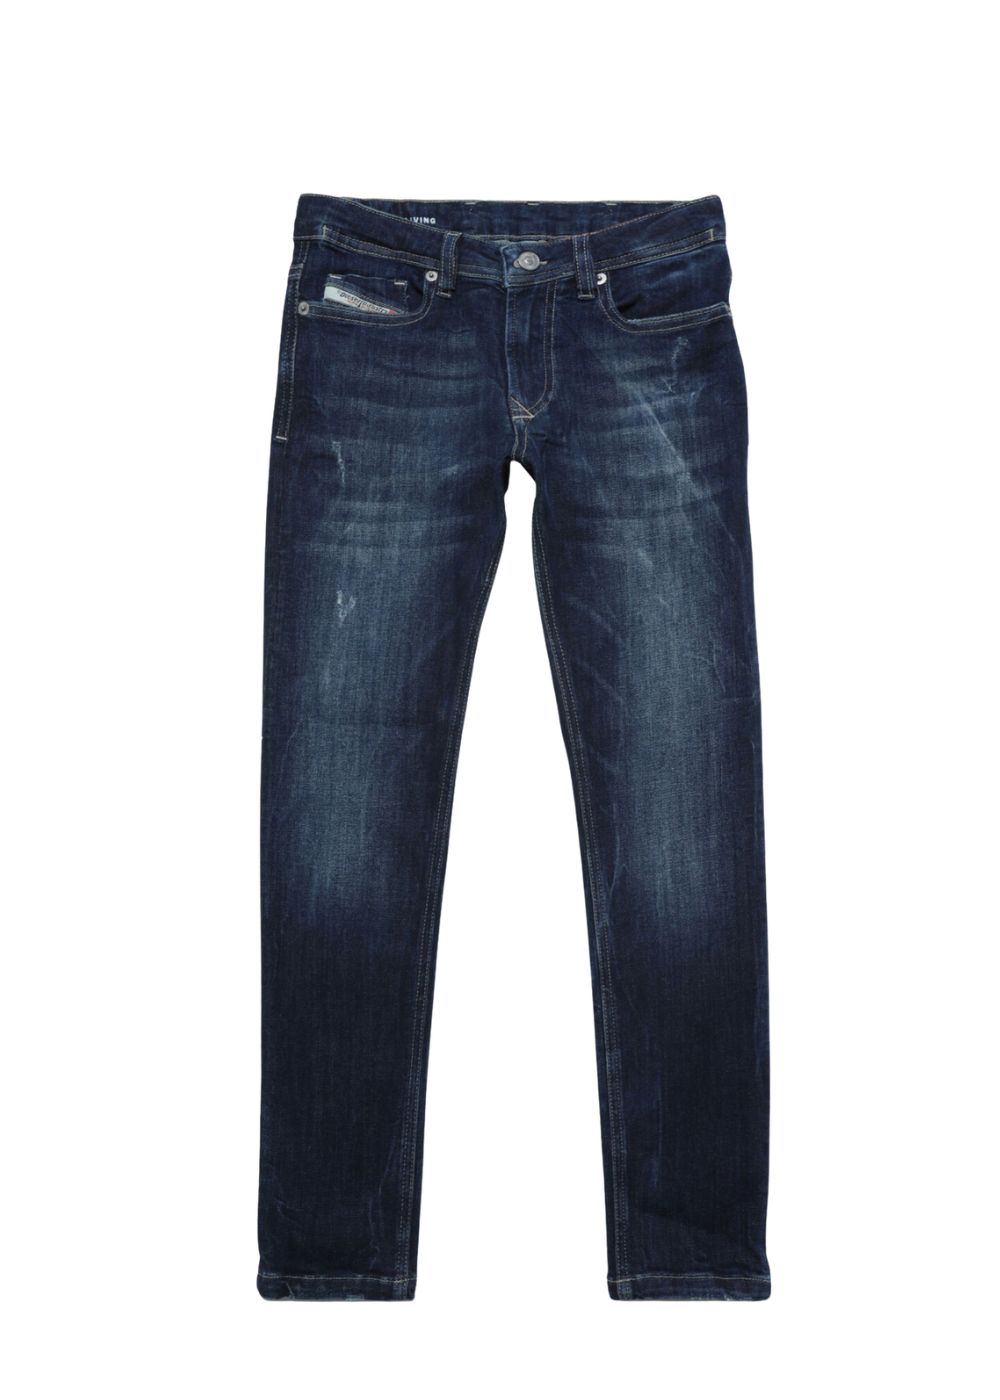 Featured image for “Diesel Jeans Blu Scuro”